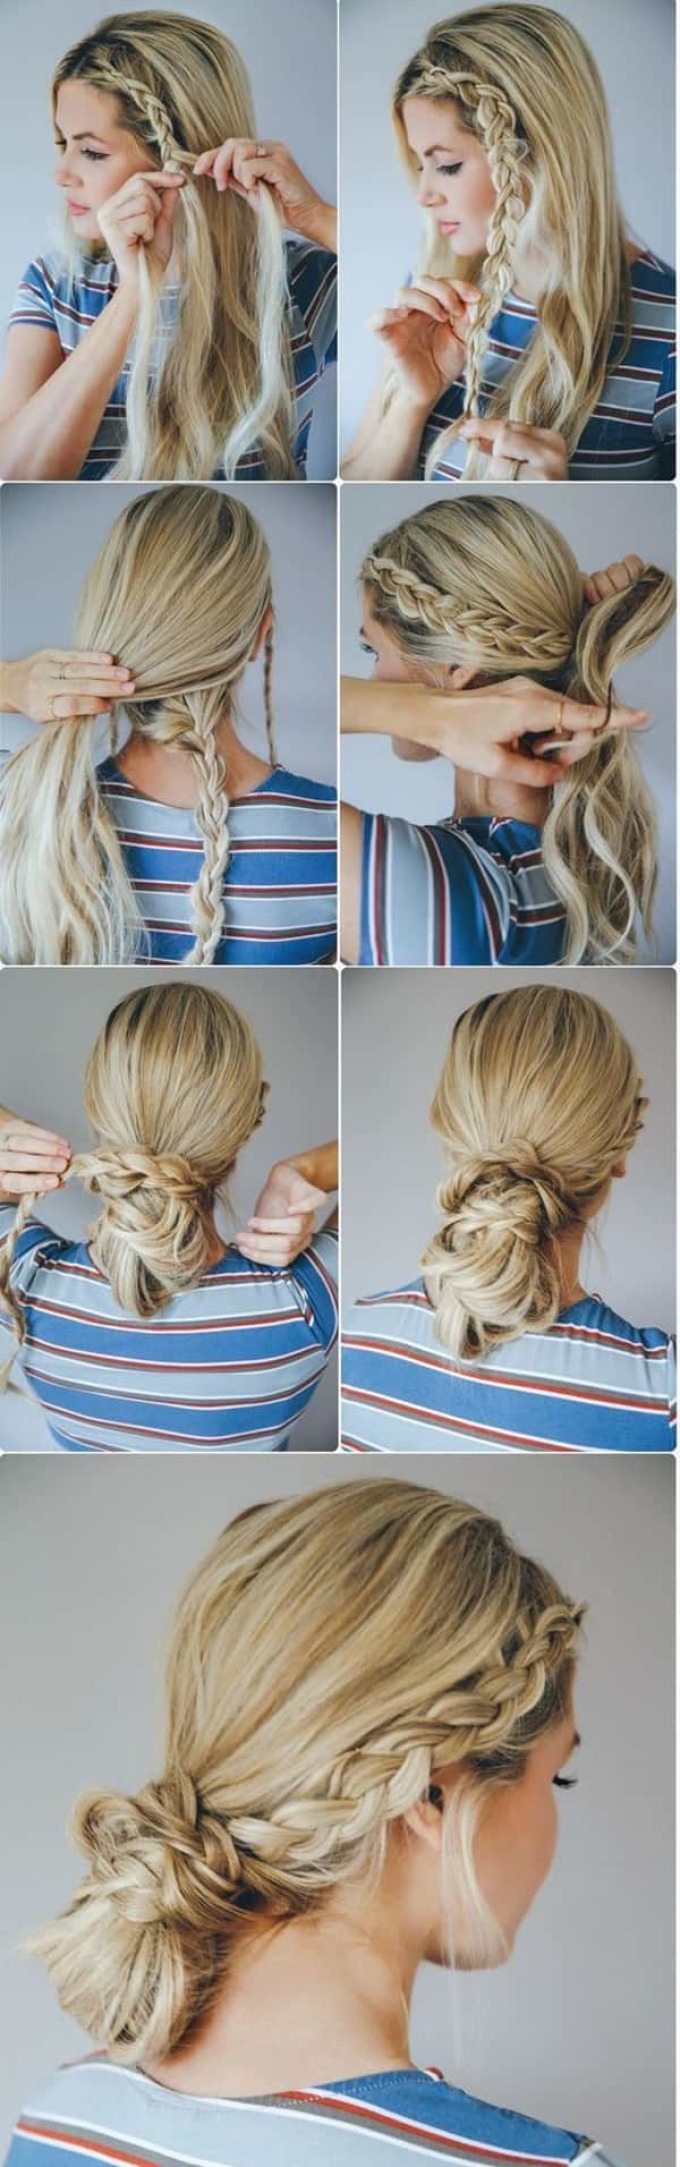 Scheme for weaving a careless low bundle from French braids